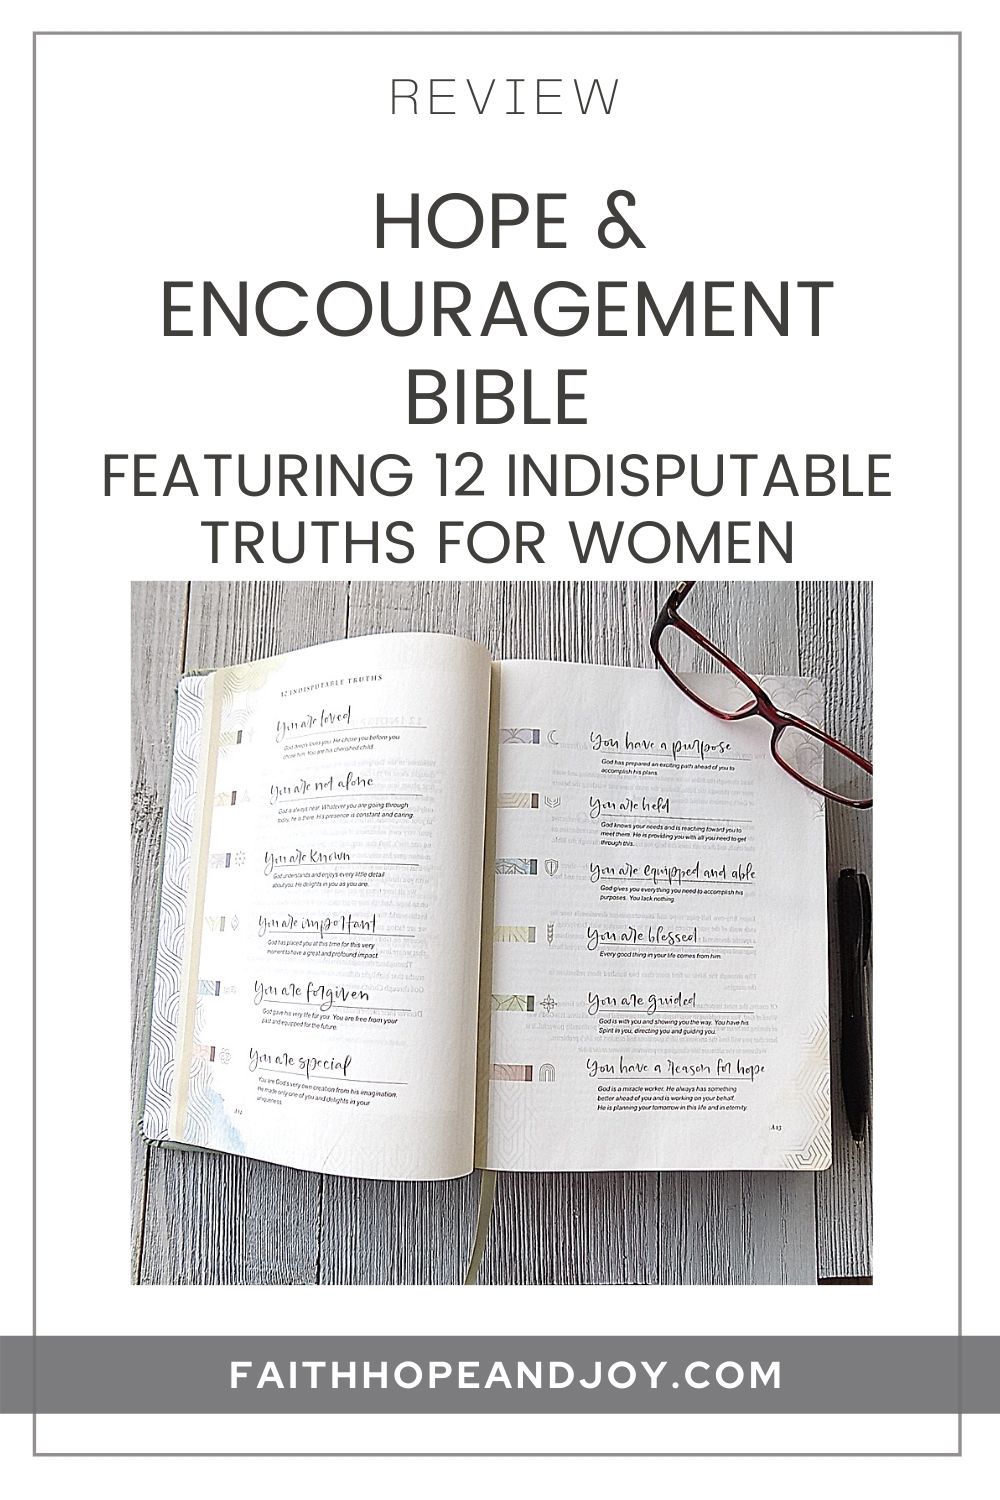 The Hope & Encouragement Bible - a Bible for women that amplifies your identity in Christ through 12 indisputable truths.